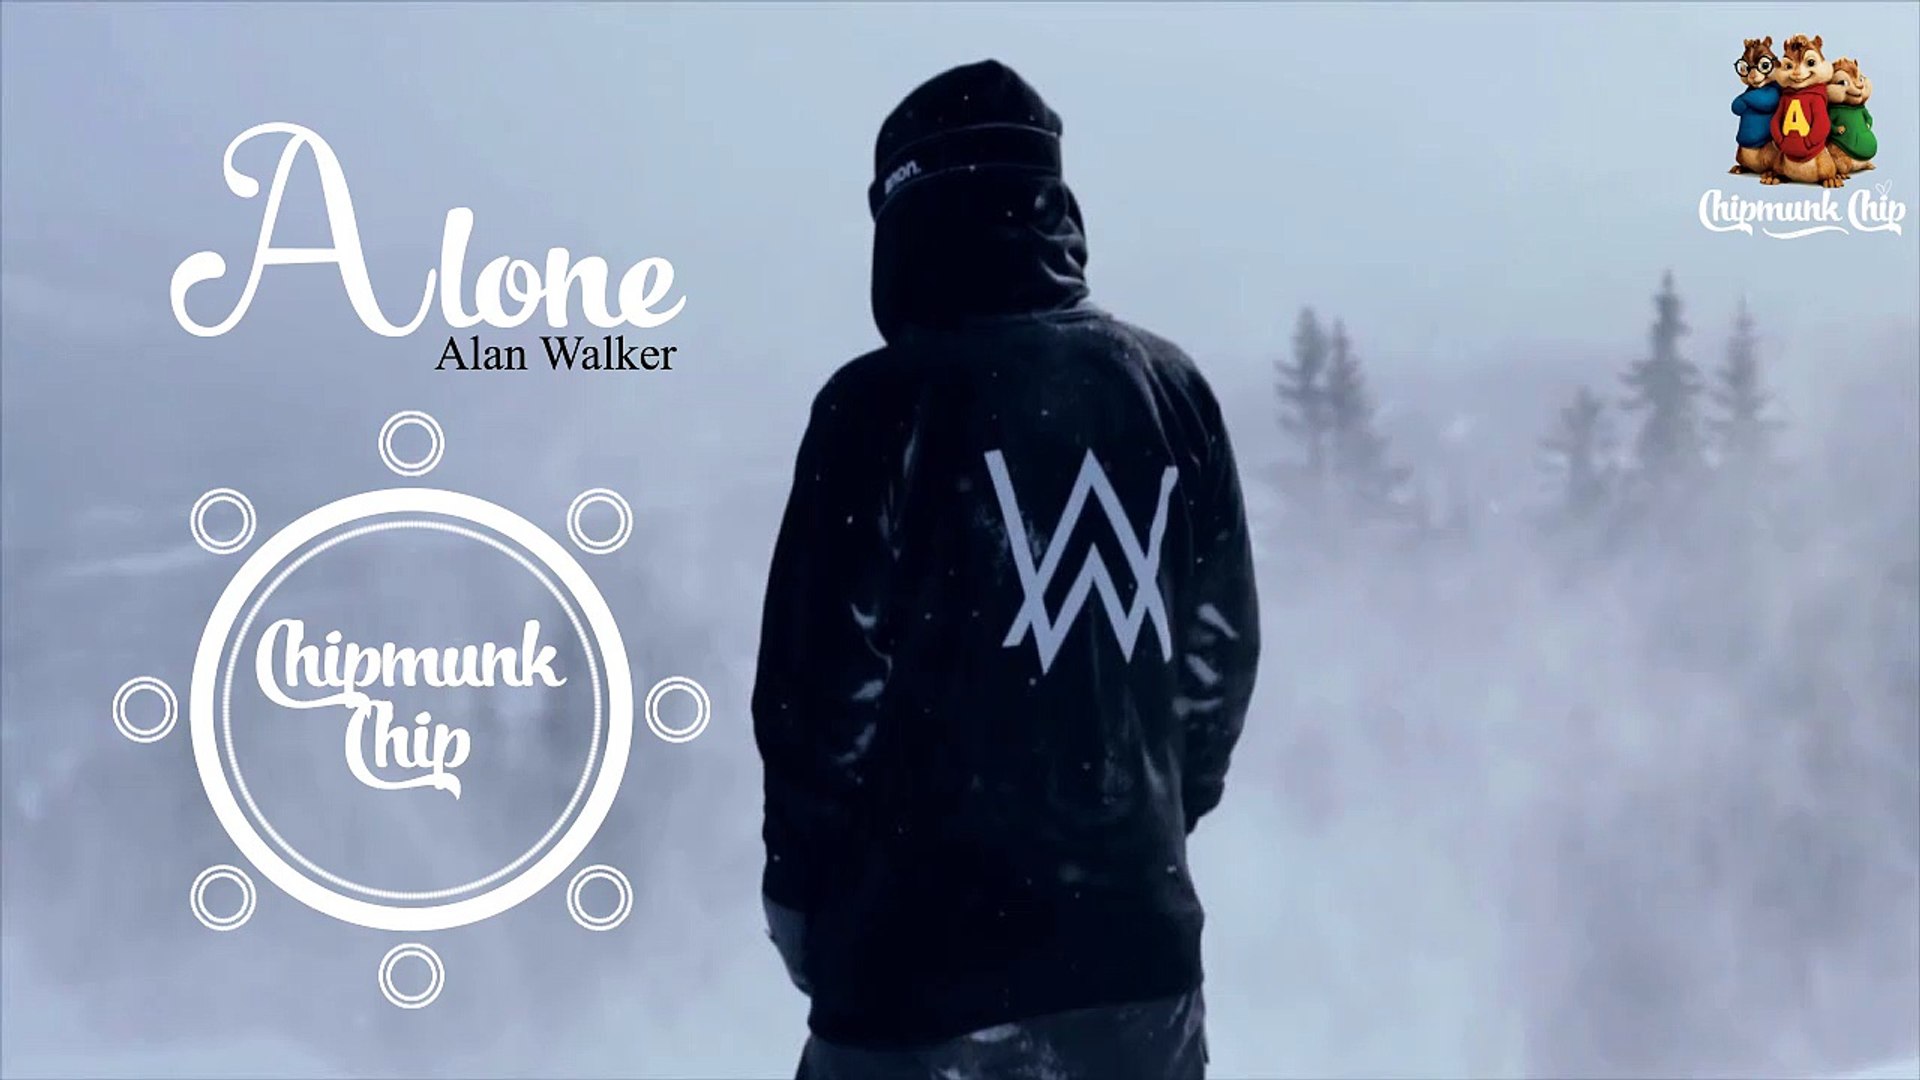 Alone - Alan Walker ( Cover By Chipmunk ) | Chipmunk Chip/Songs [ Official Audio Lyrics ]